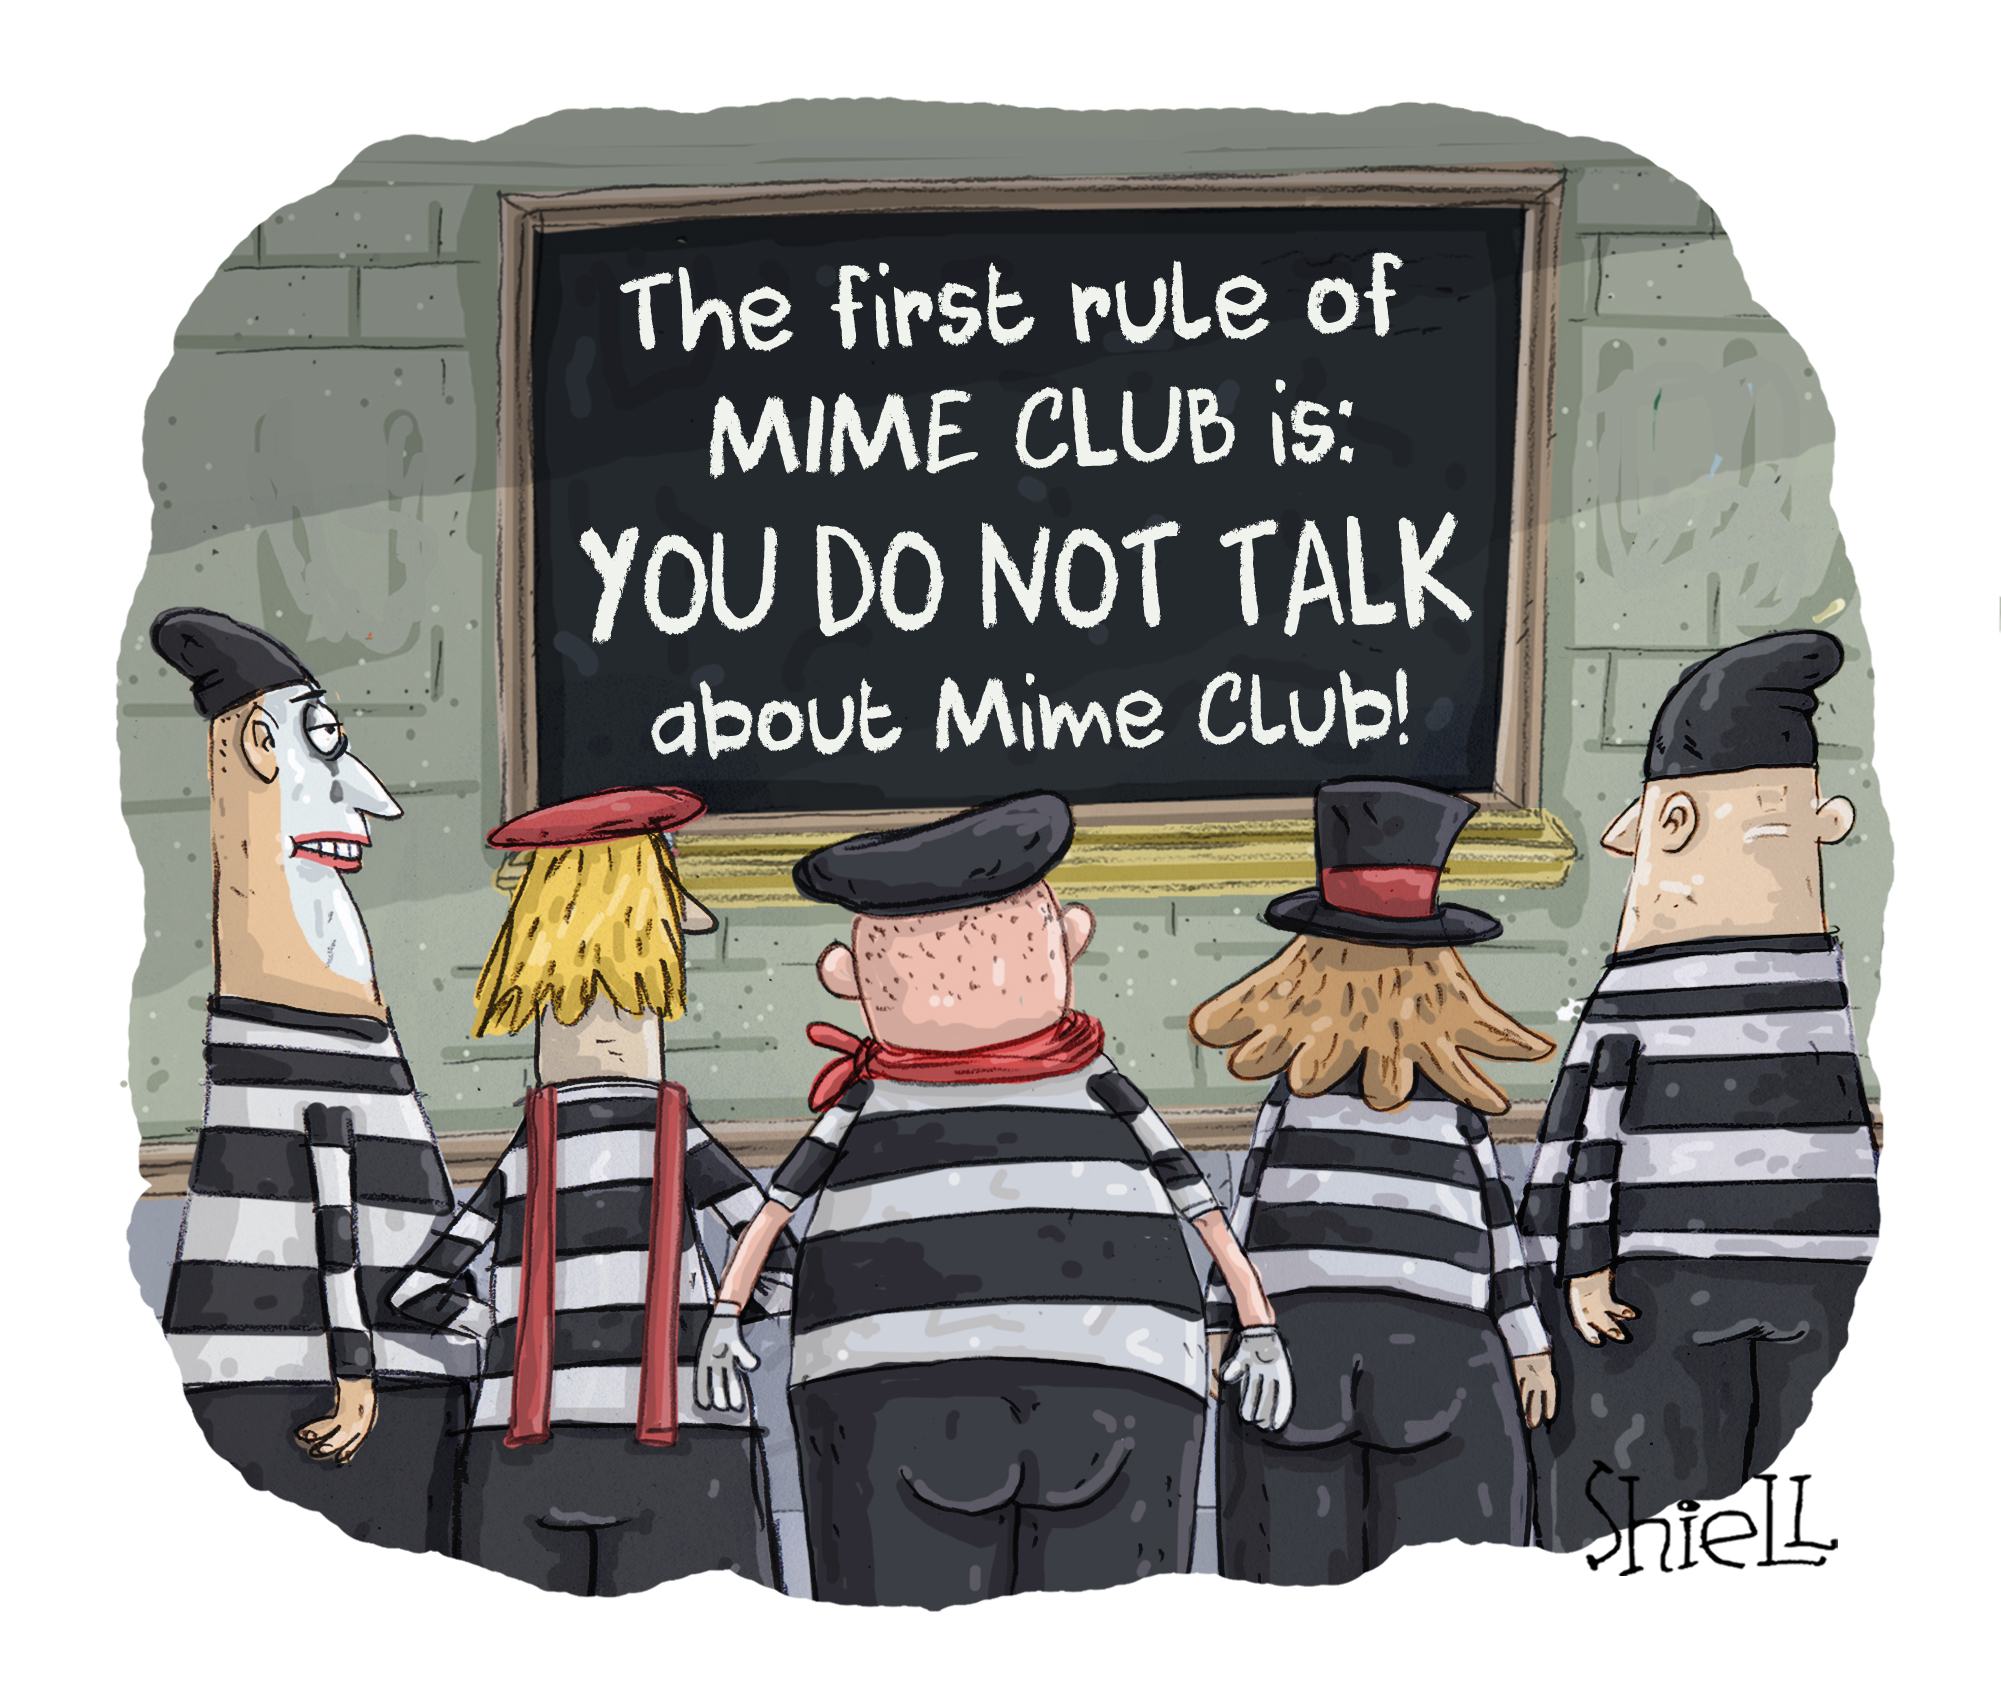 The First rule of Mime Club is ...